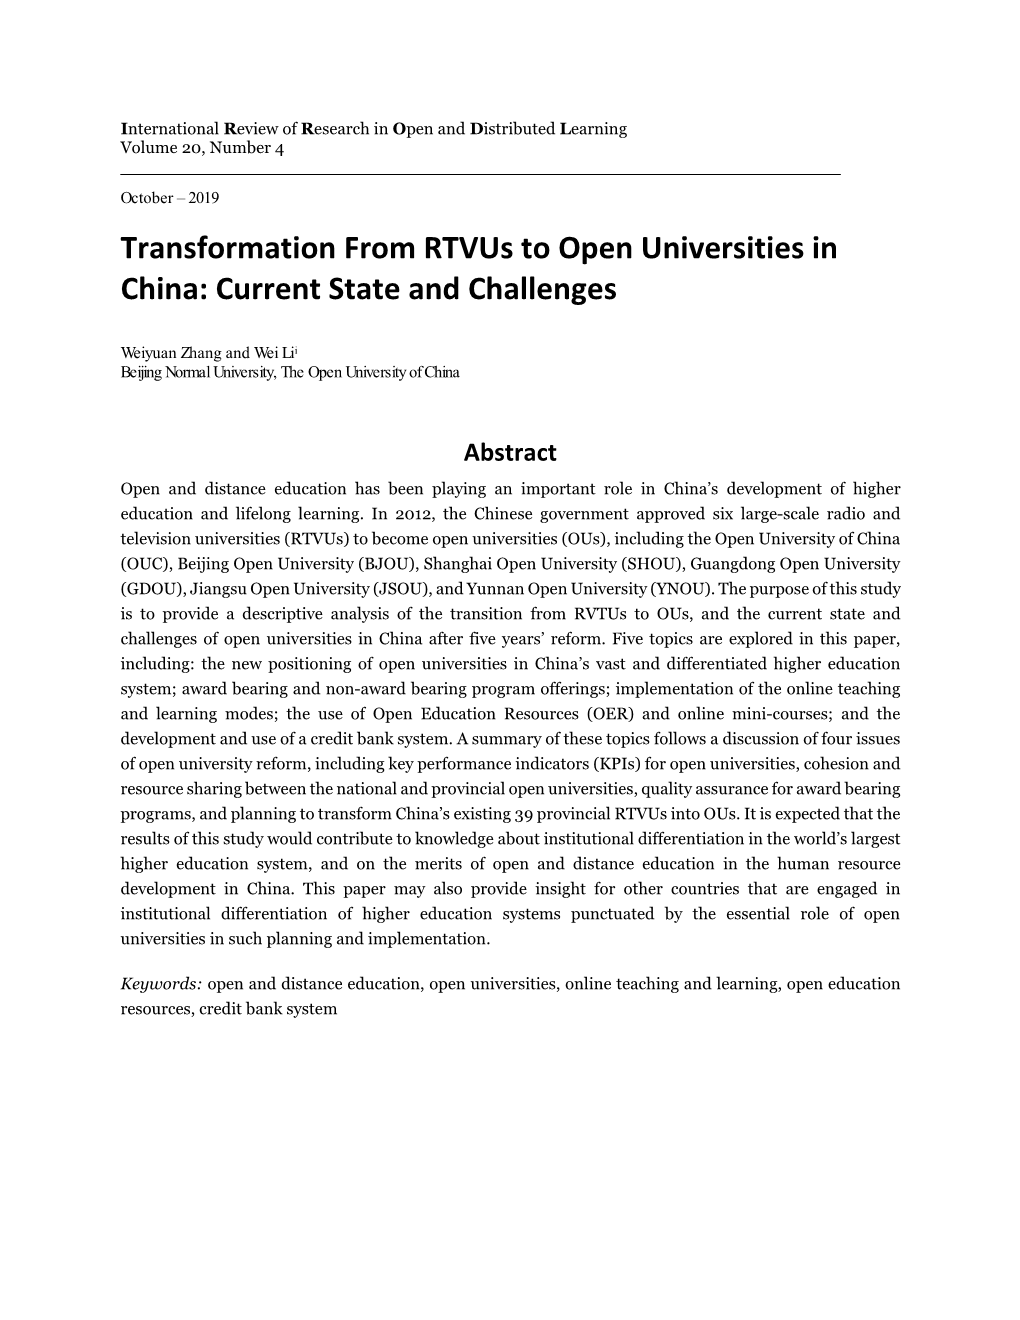 Transformation from Rtvus to Open Universities in China: Current State and Challenges